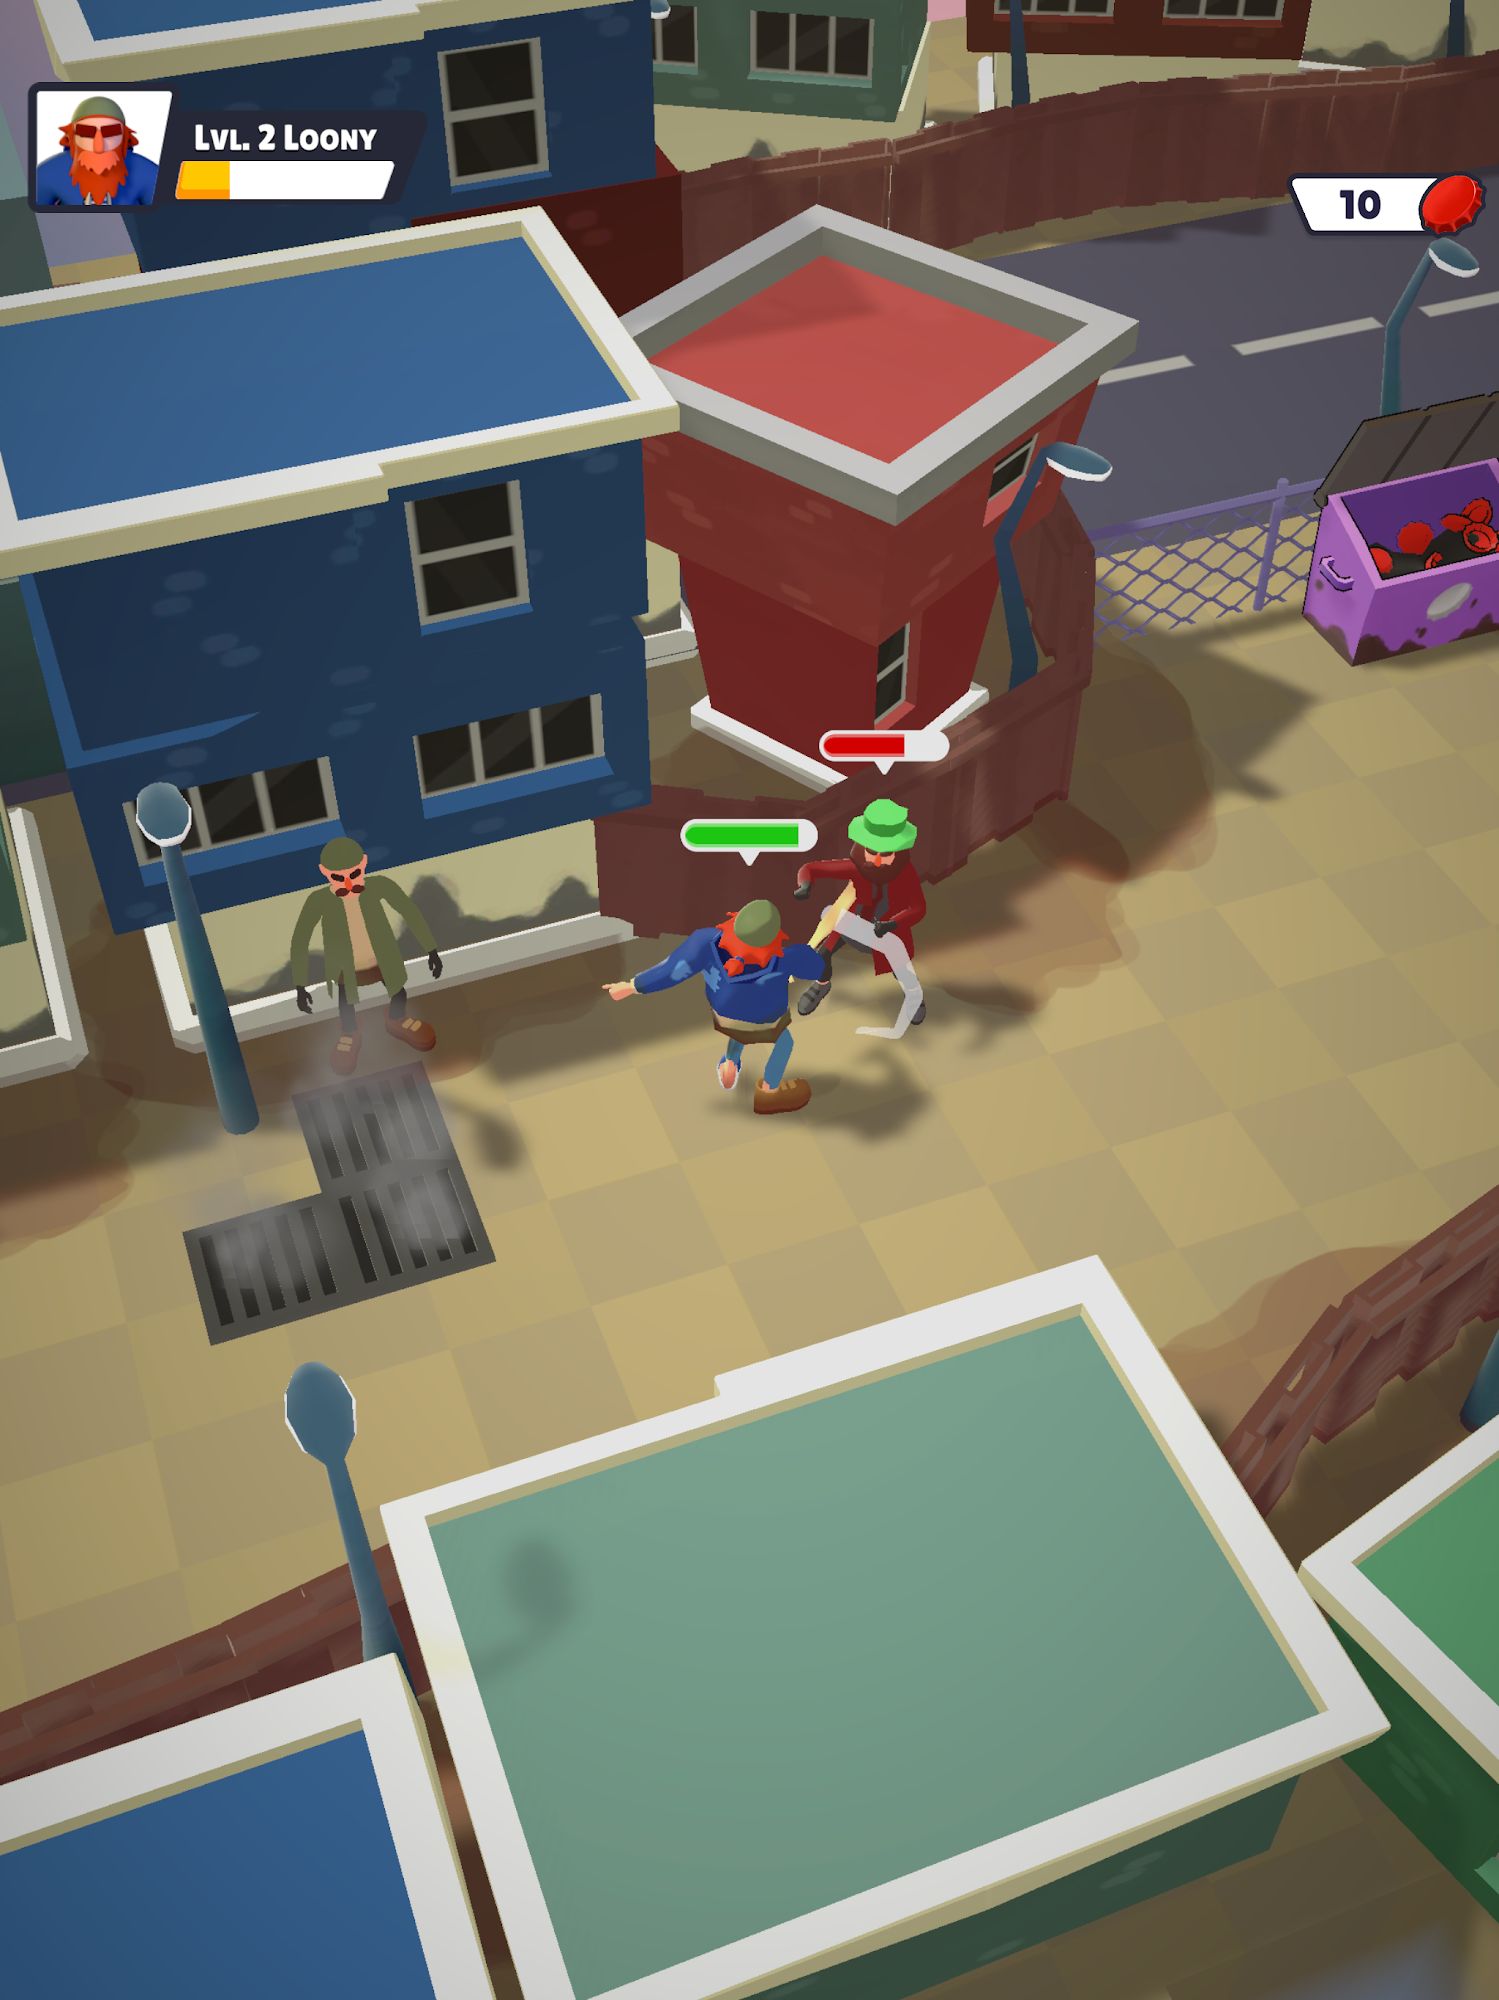 Street Dude - Homeless Empire - Android game screenshots.